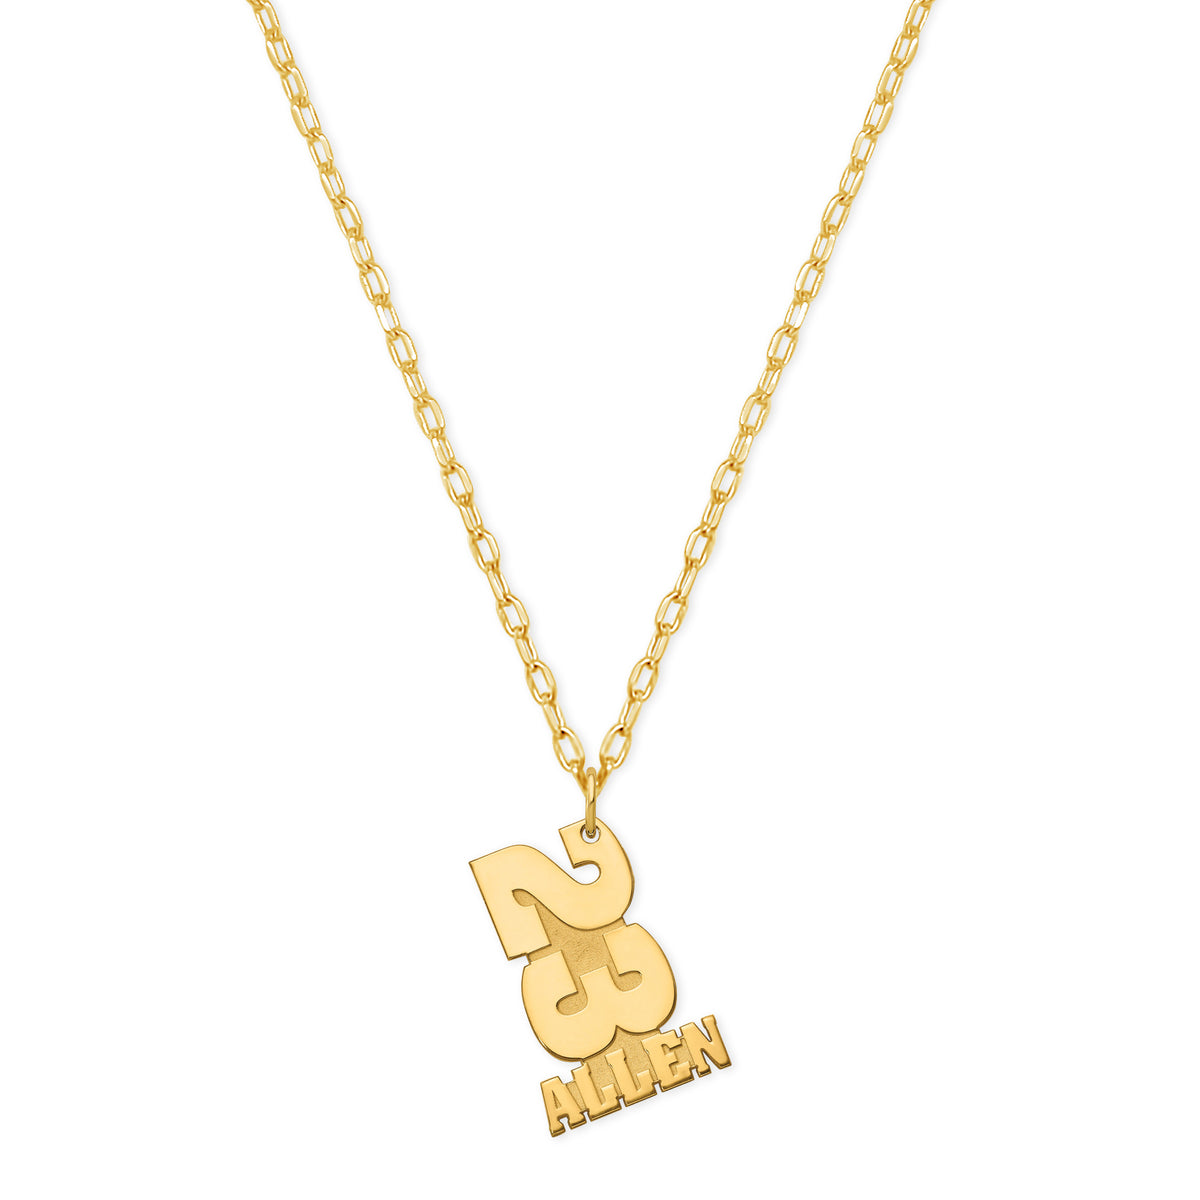 Stacked Number and Name Pendant / Charm Gift For Athlete for Any Sport